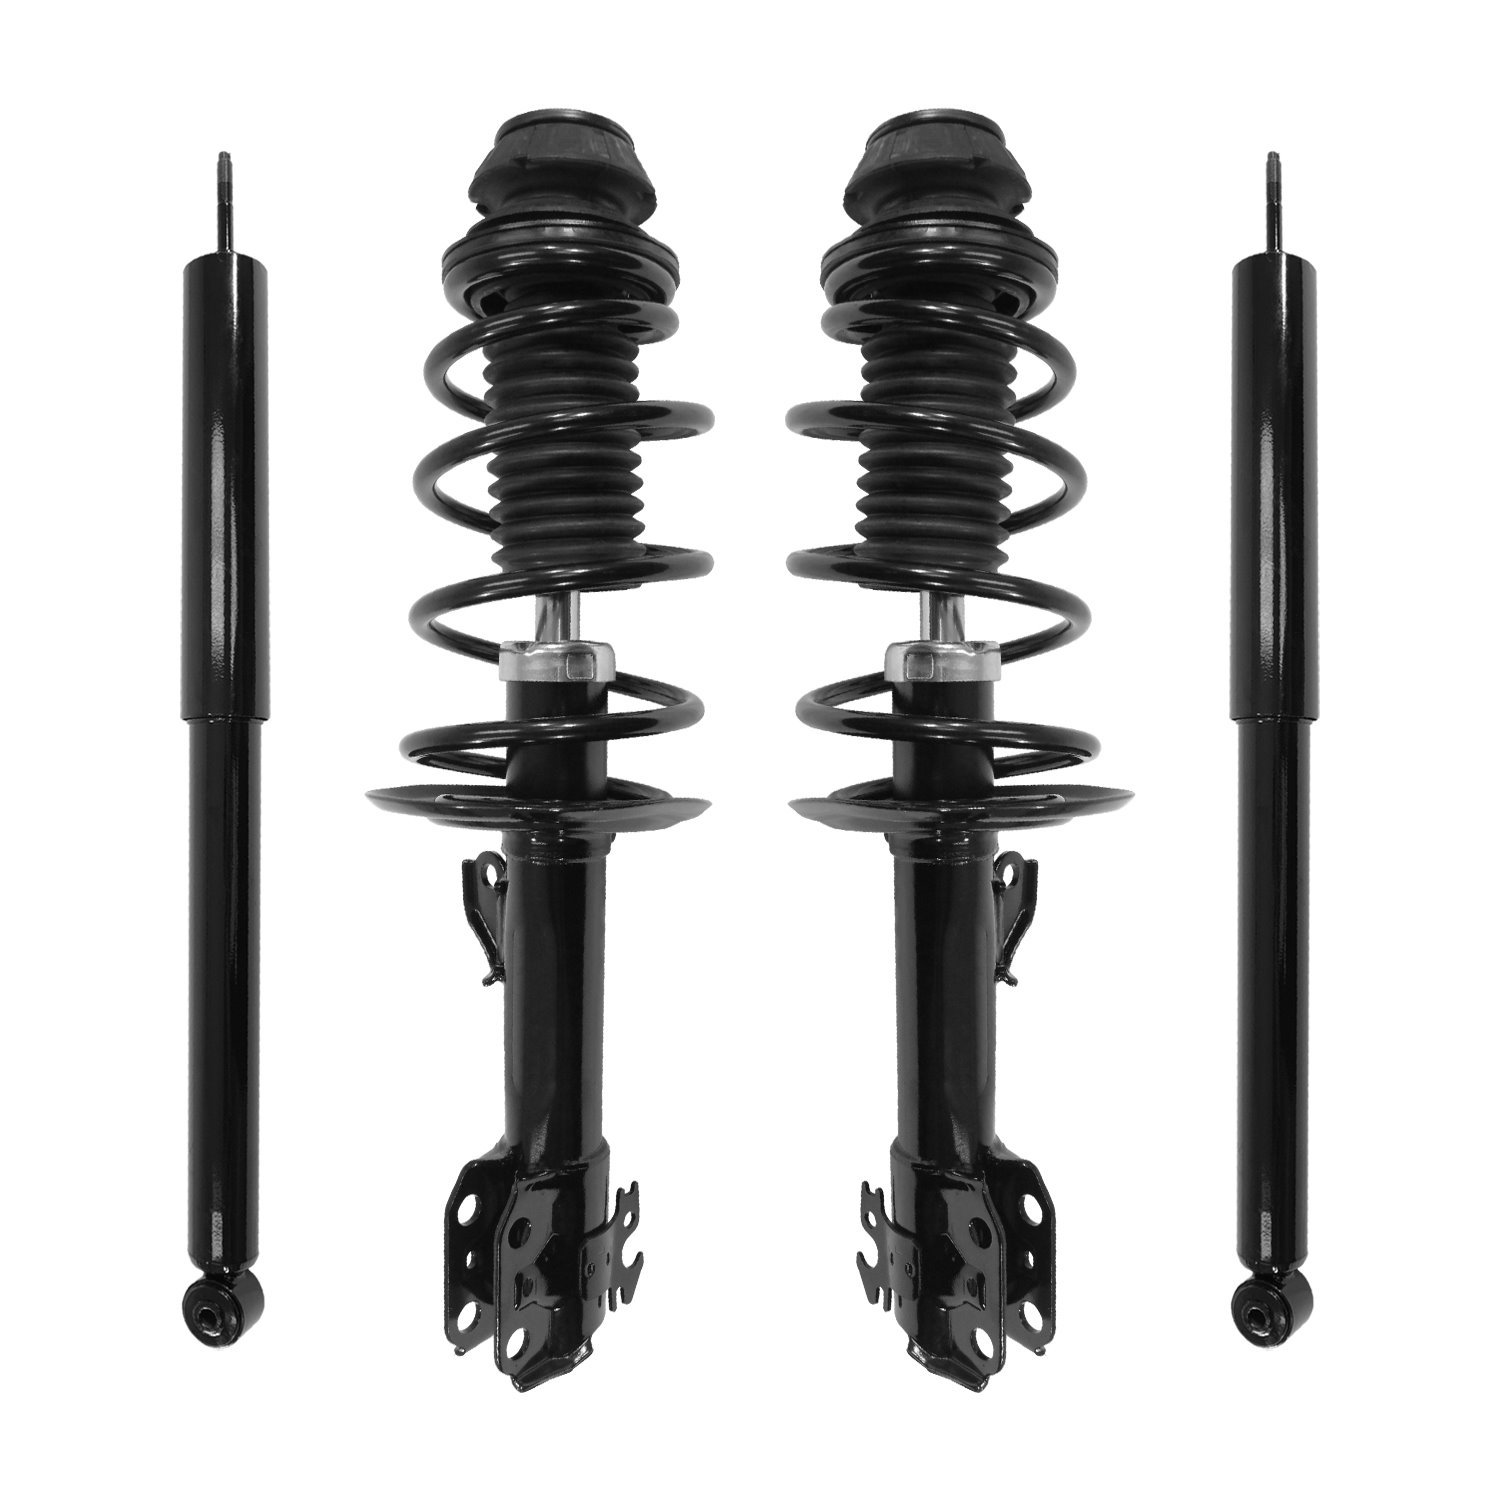 4-13071-254130-001 Front & Rear Suspension Strut & Coil Spring Assembly Fits Select Scion xD